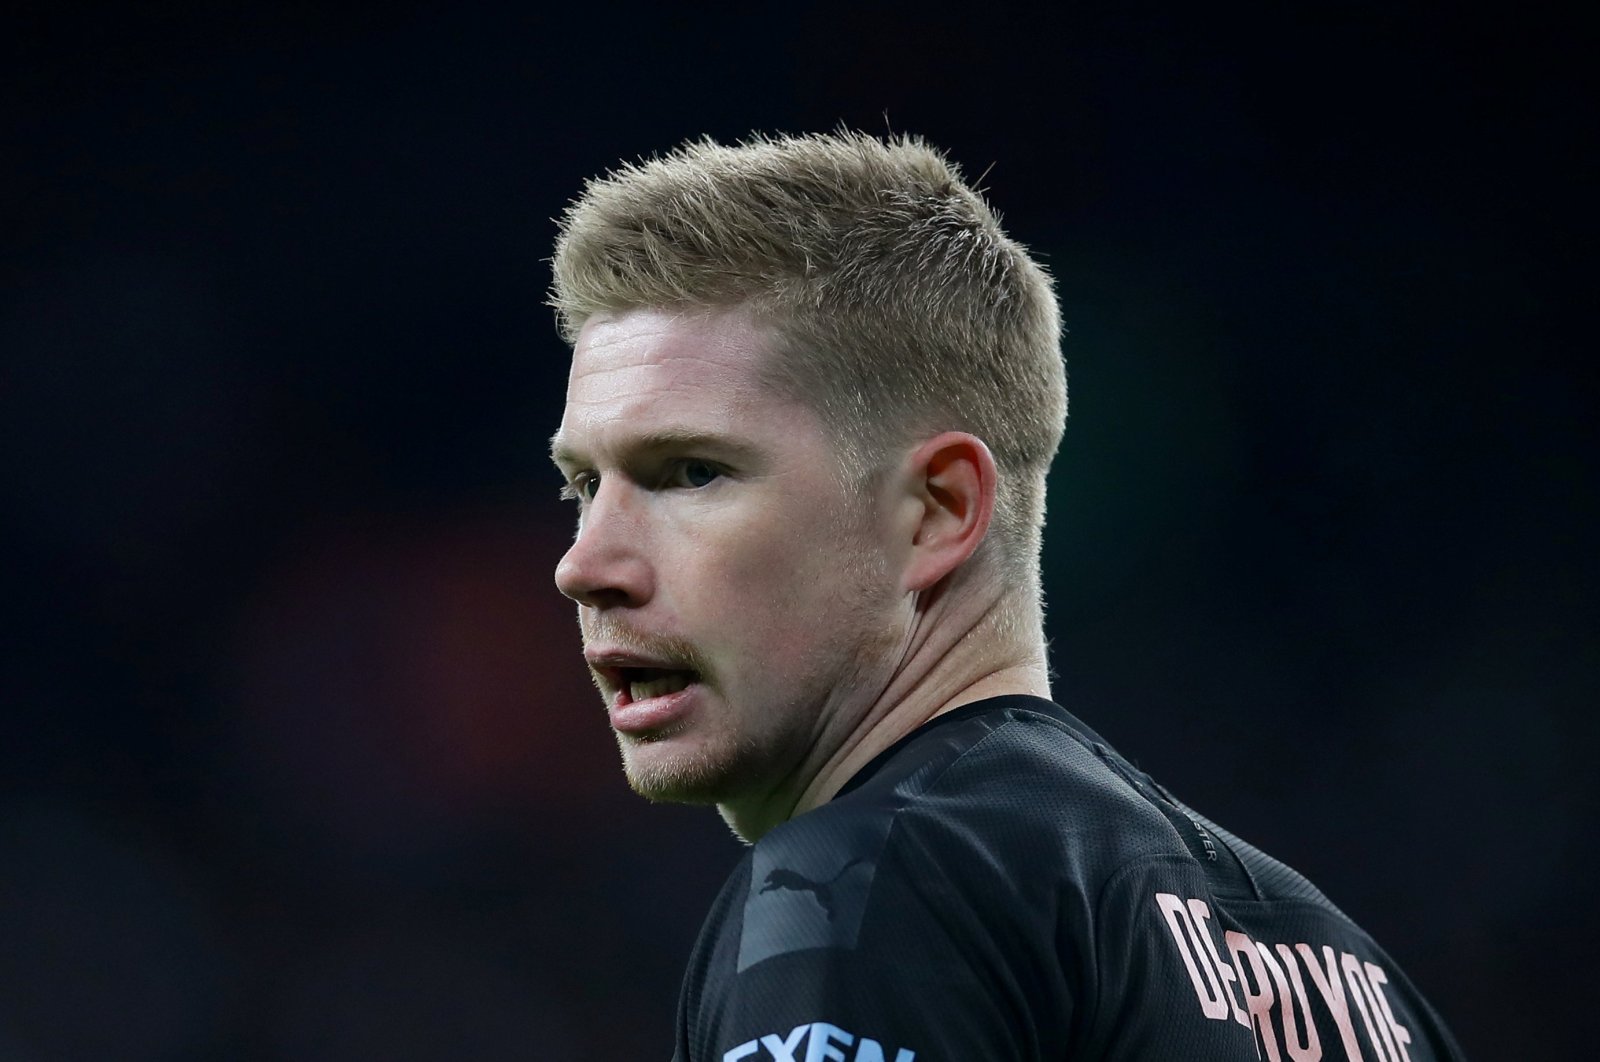 Manchester City's Kevin De Bruyne during the Carabao Cup Final against Aston Villa, Wembley Stadium, London, March 1, 2020. (REUTERS Photo)